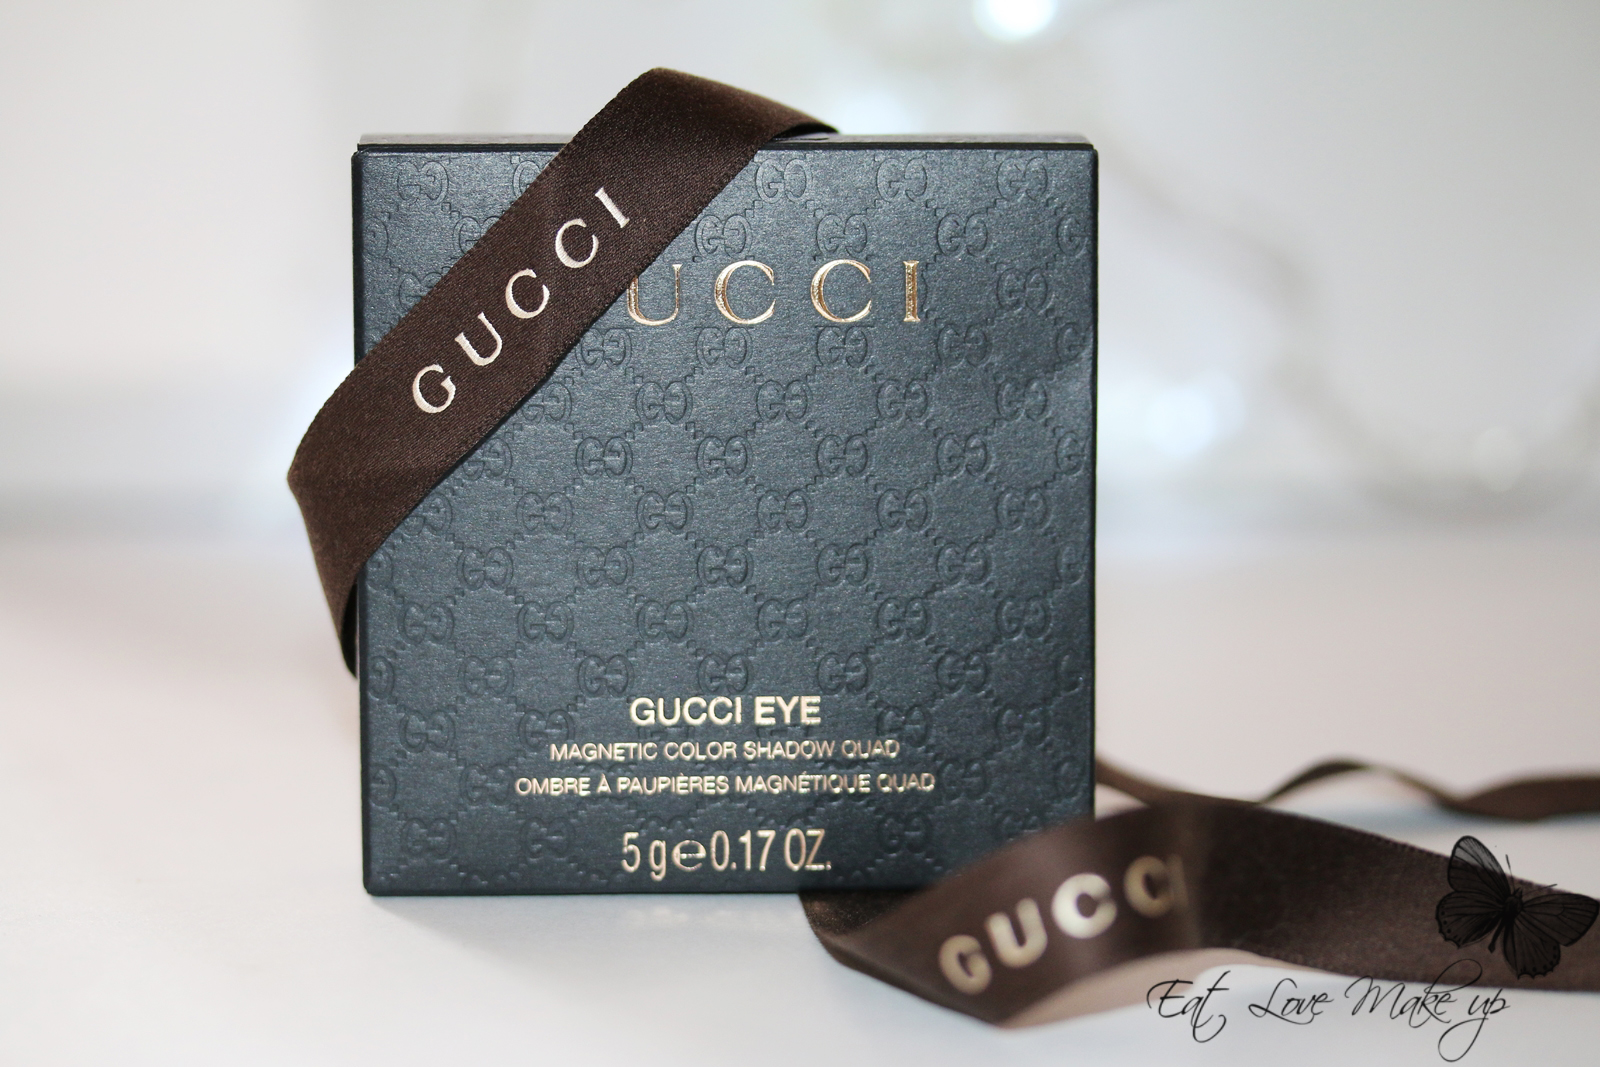 Gucci Magnetic Color Shadow Quad 030 Crystal Copper